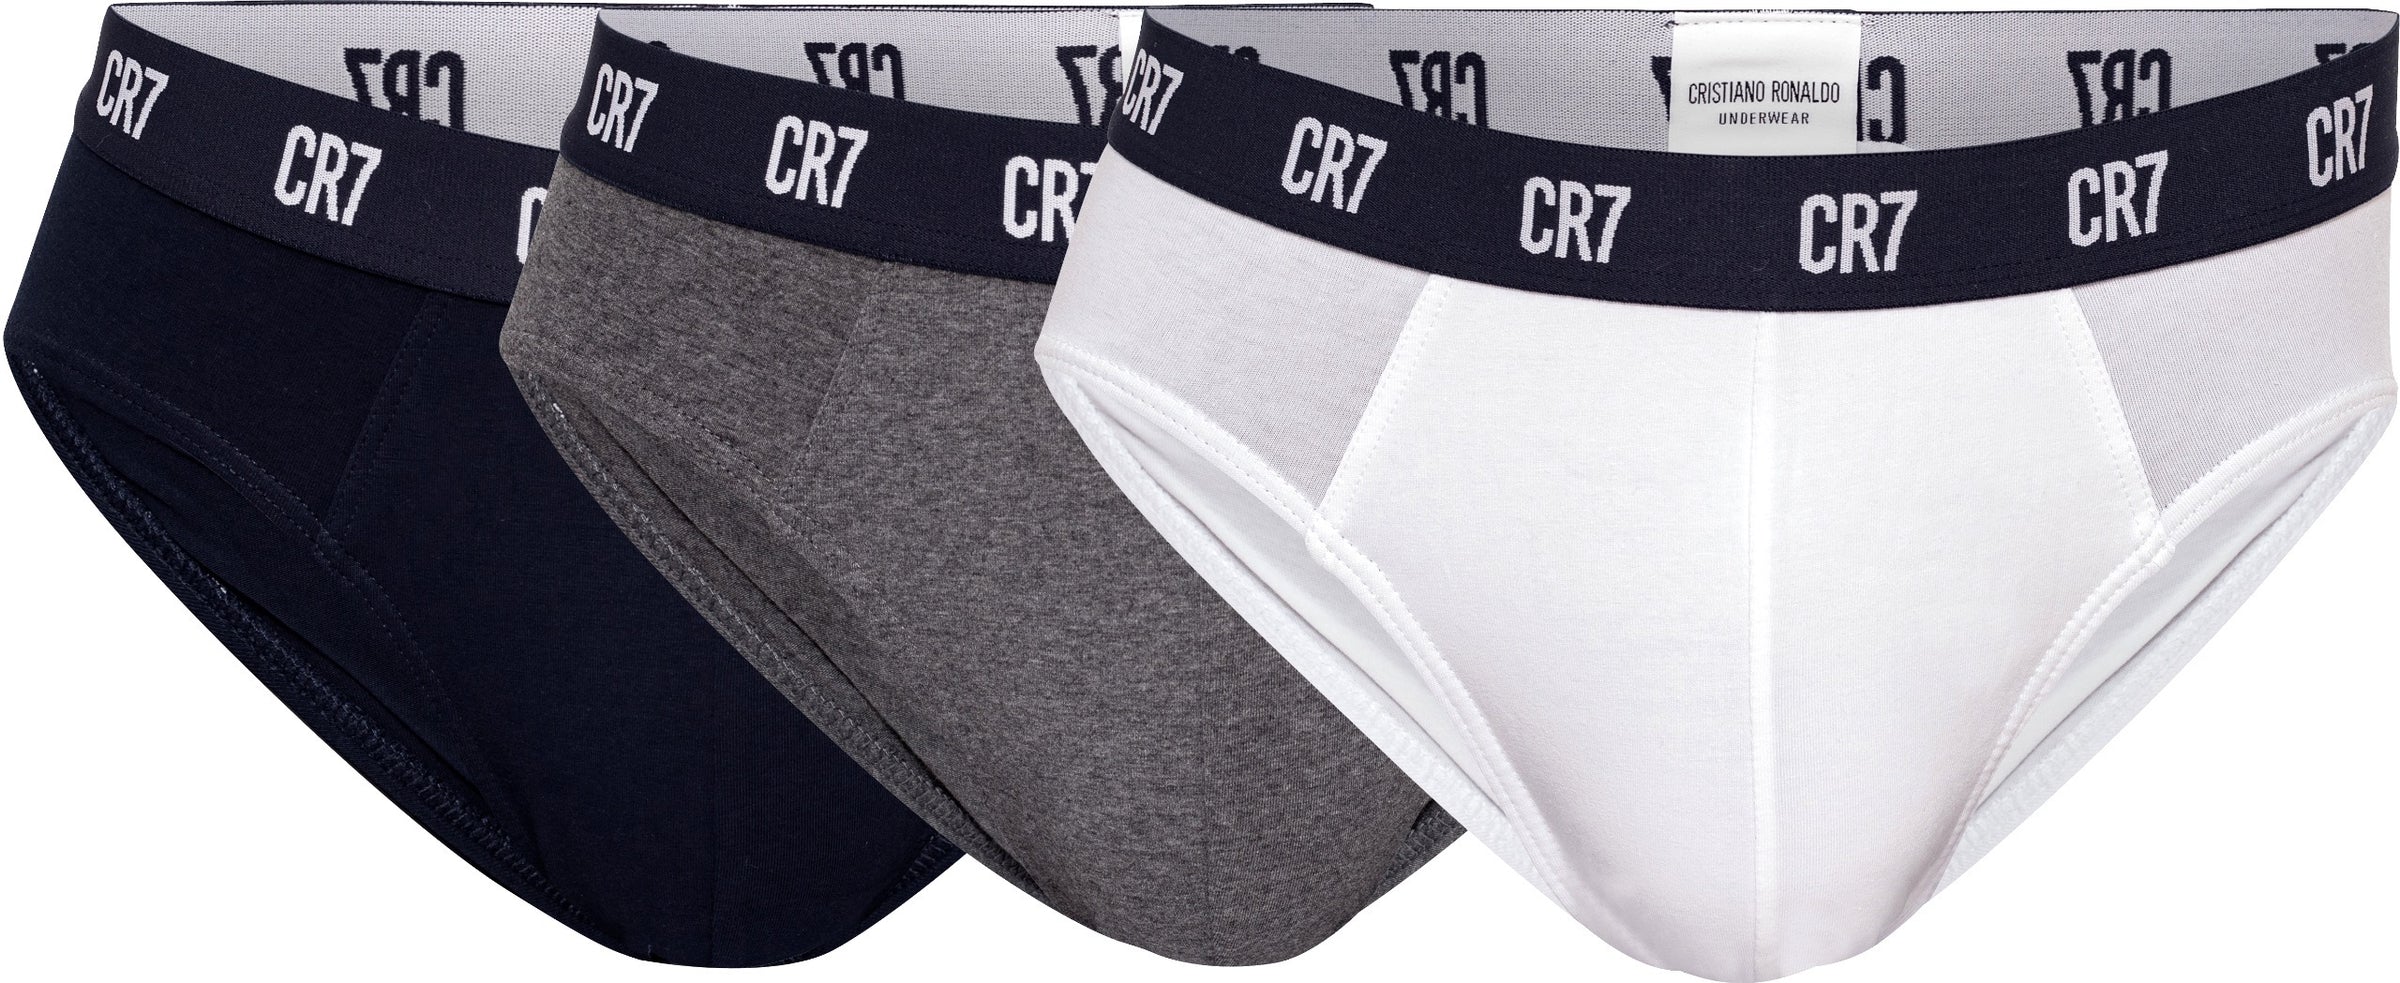 Cristiano Ronaldo Mens Cotton Boxer Shorts, Sexy Underpants, Quality Pull  In Male Panties From Luo03, $16.44